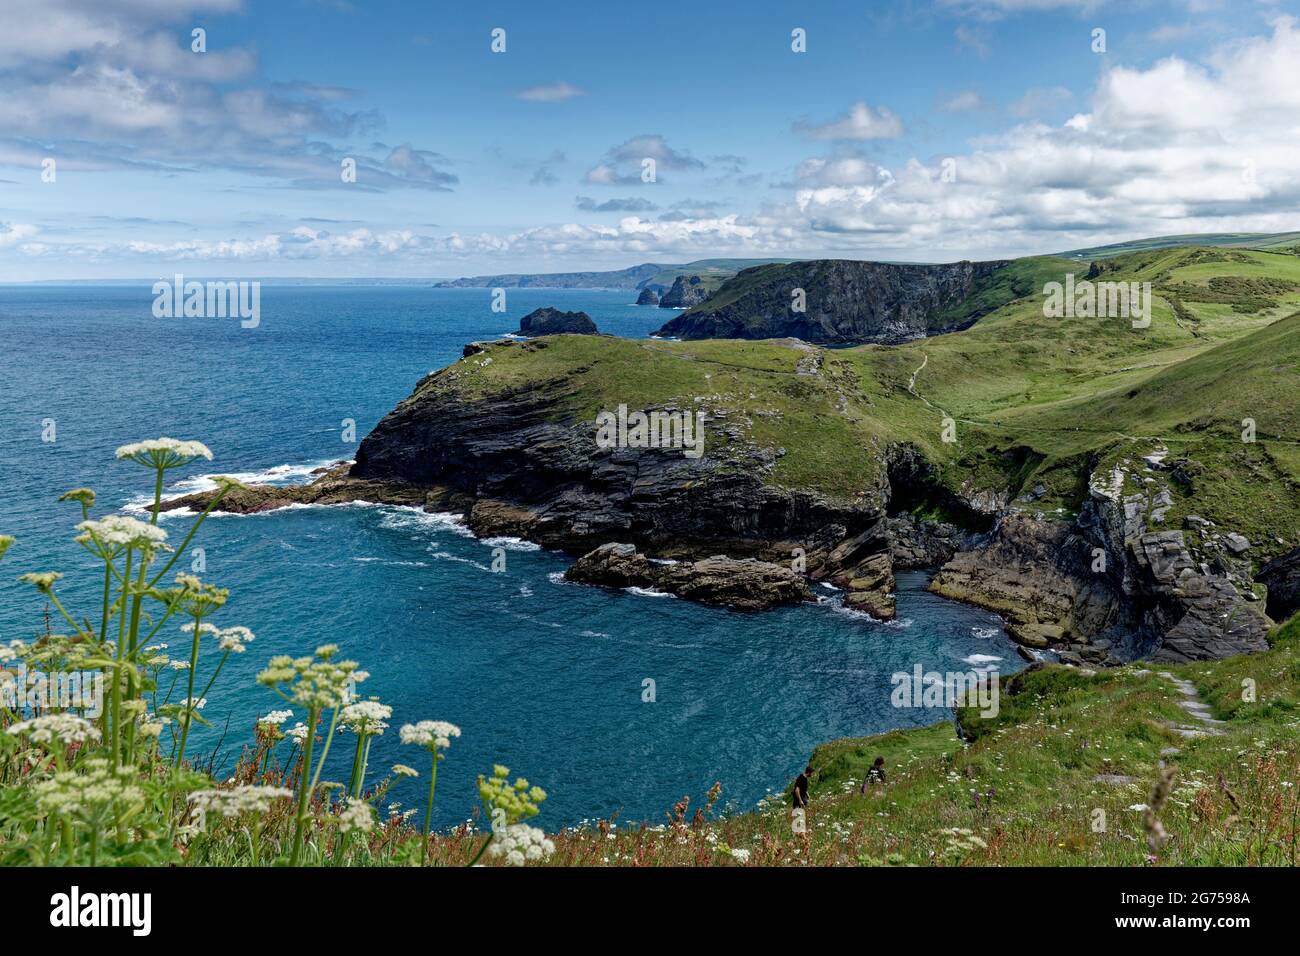 Superb scenery abounds along the North coast of Cornwall in the far South West of England. Especially here at Tintagel Stock Photo